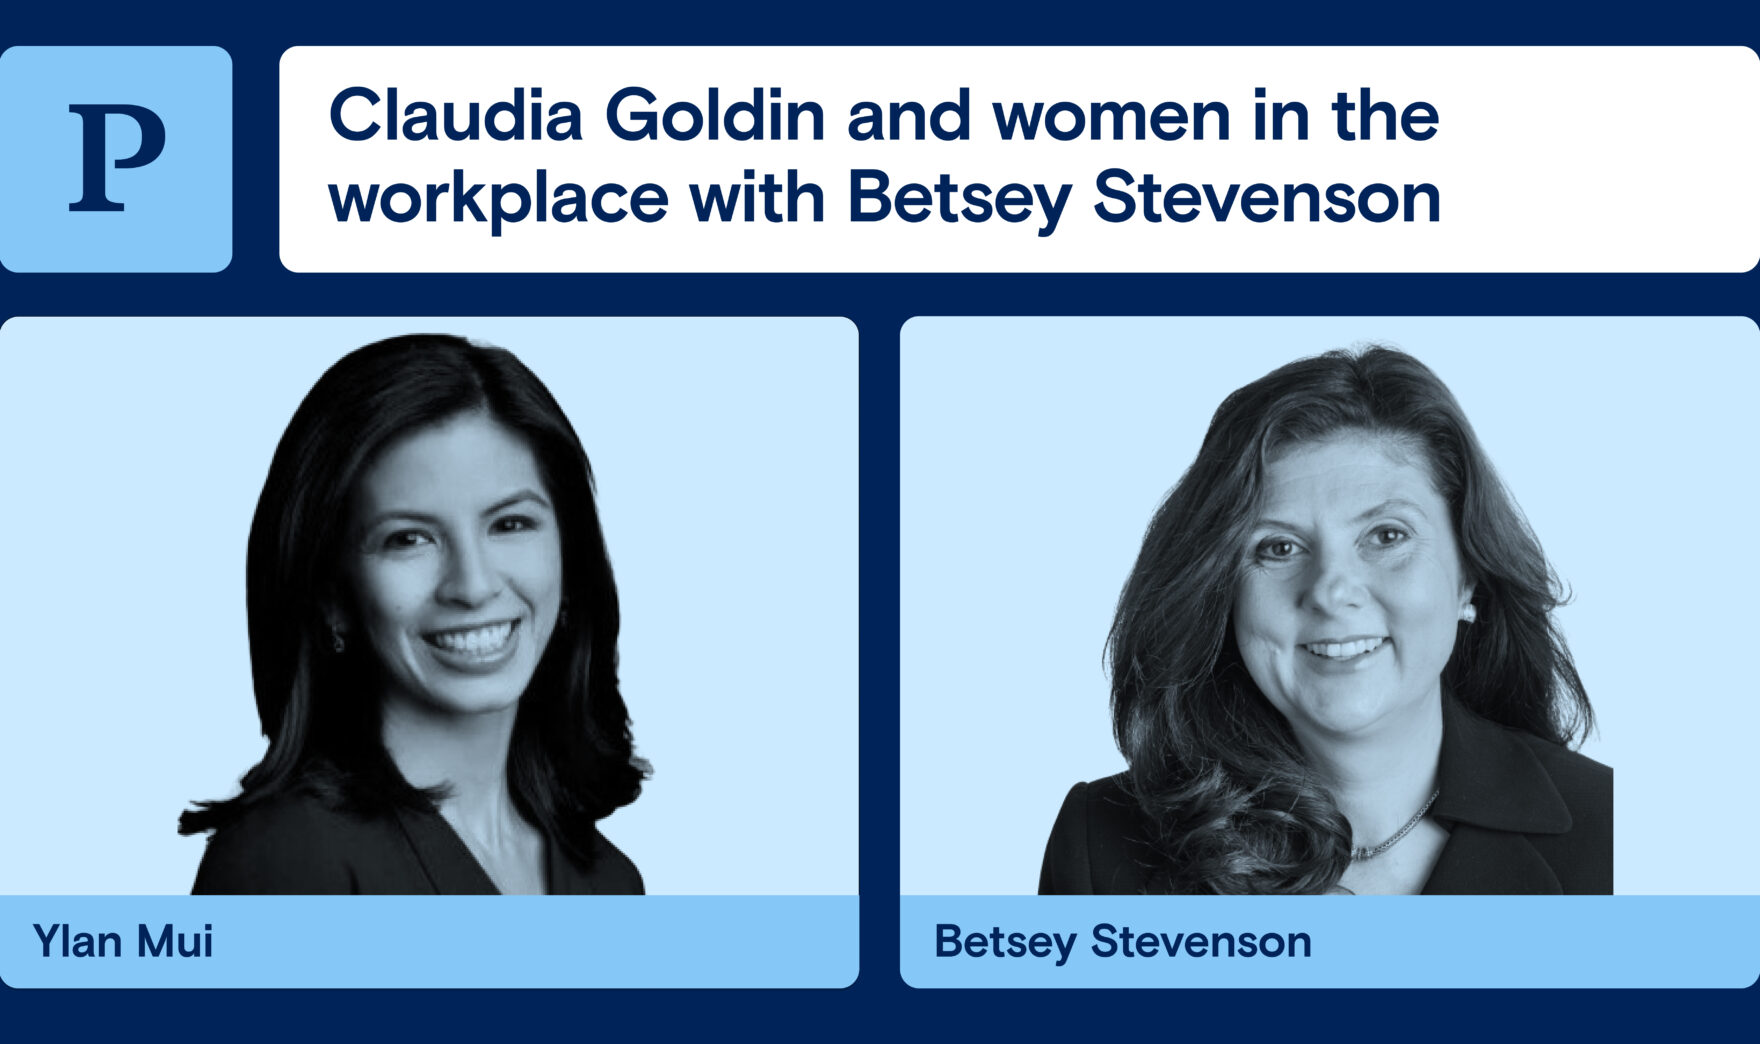 Claudia Goldin and women in the workplace with Betsey Stevenson